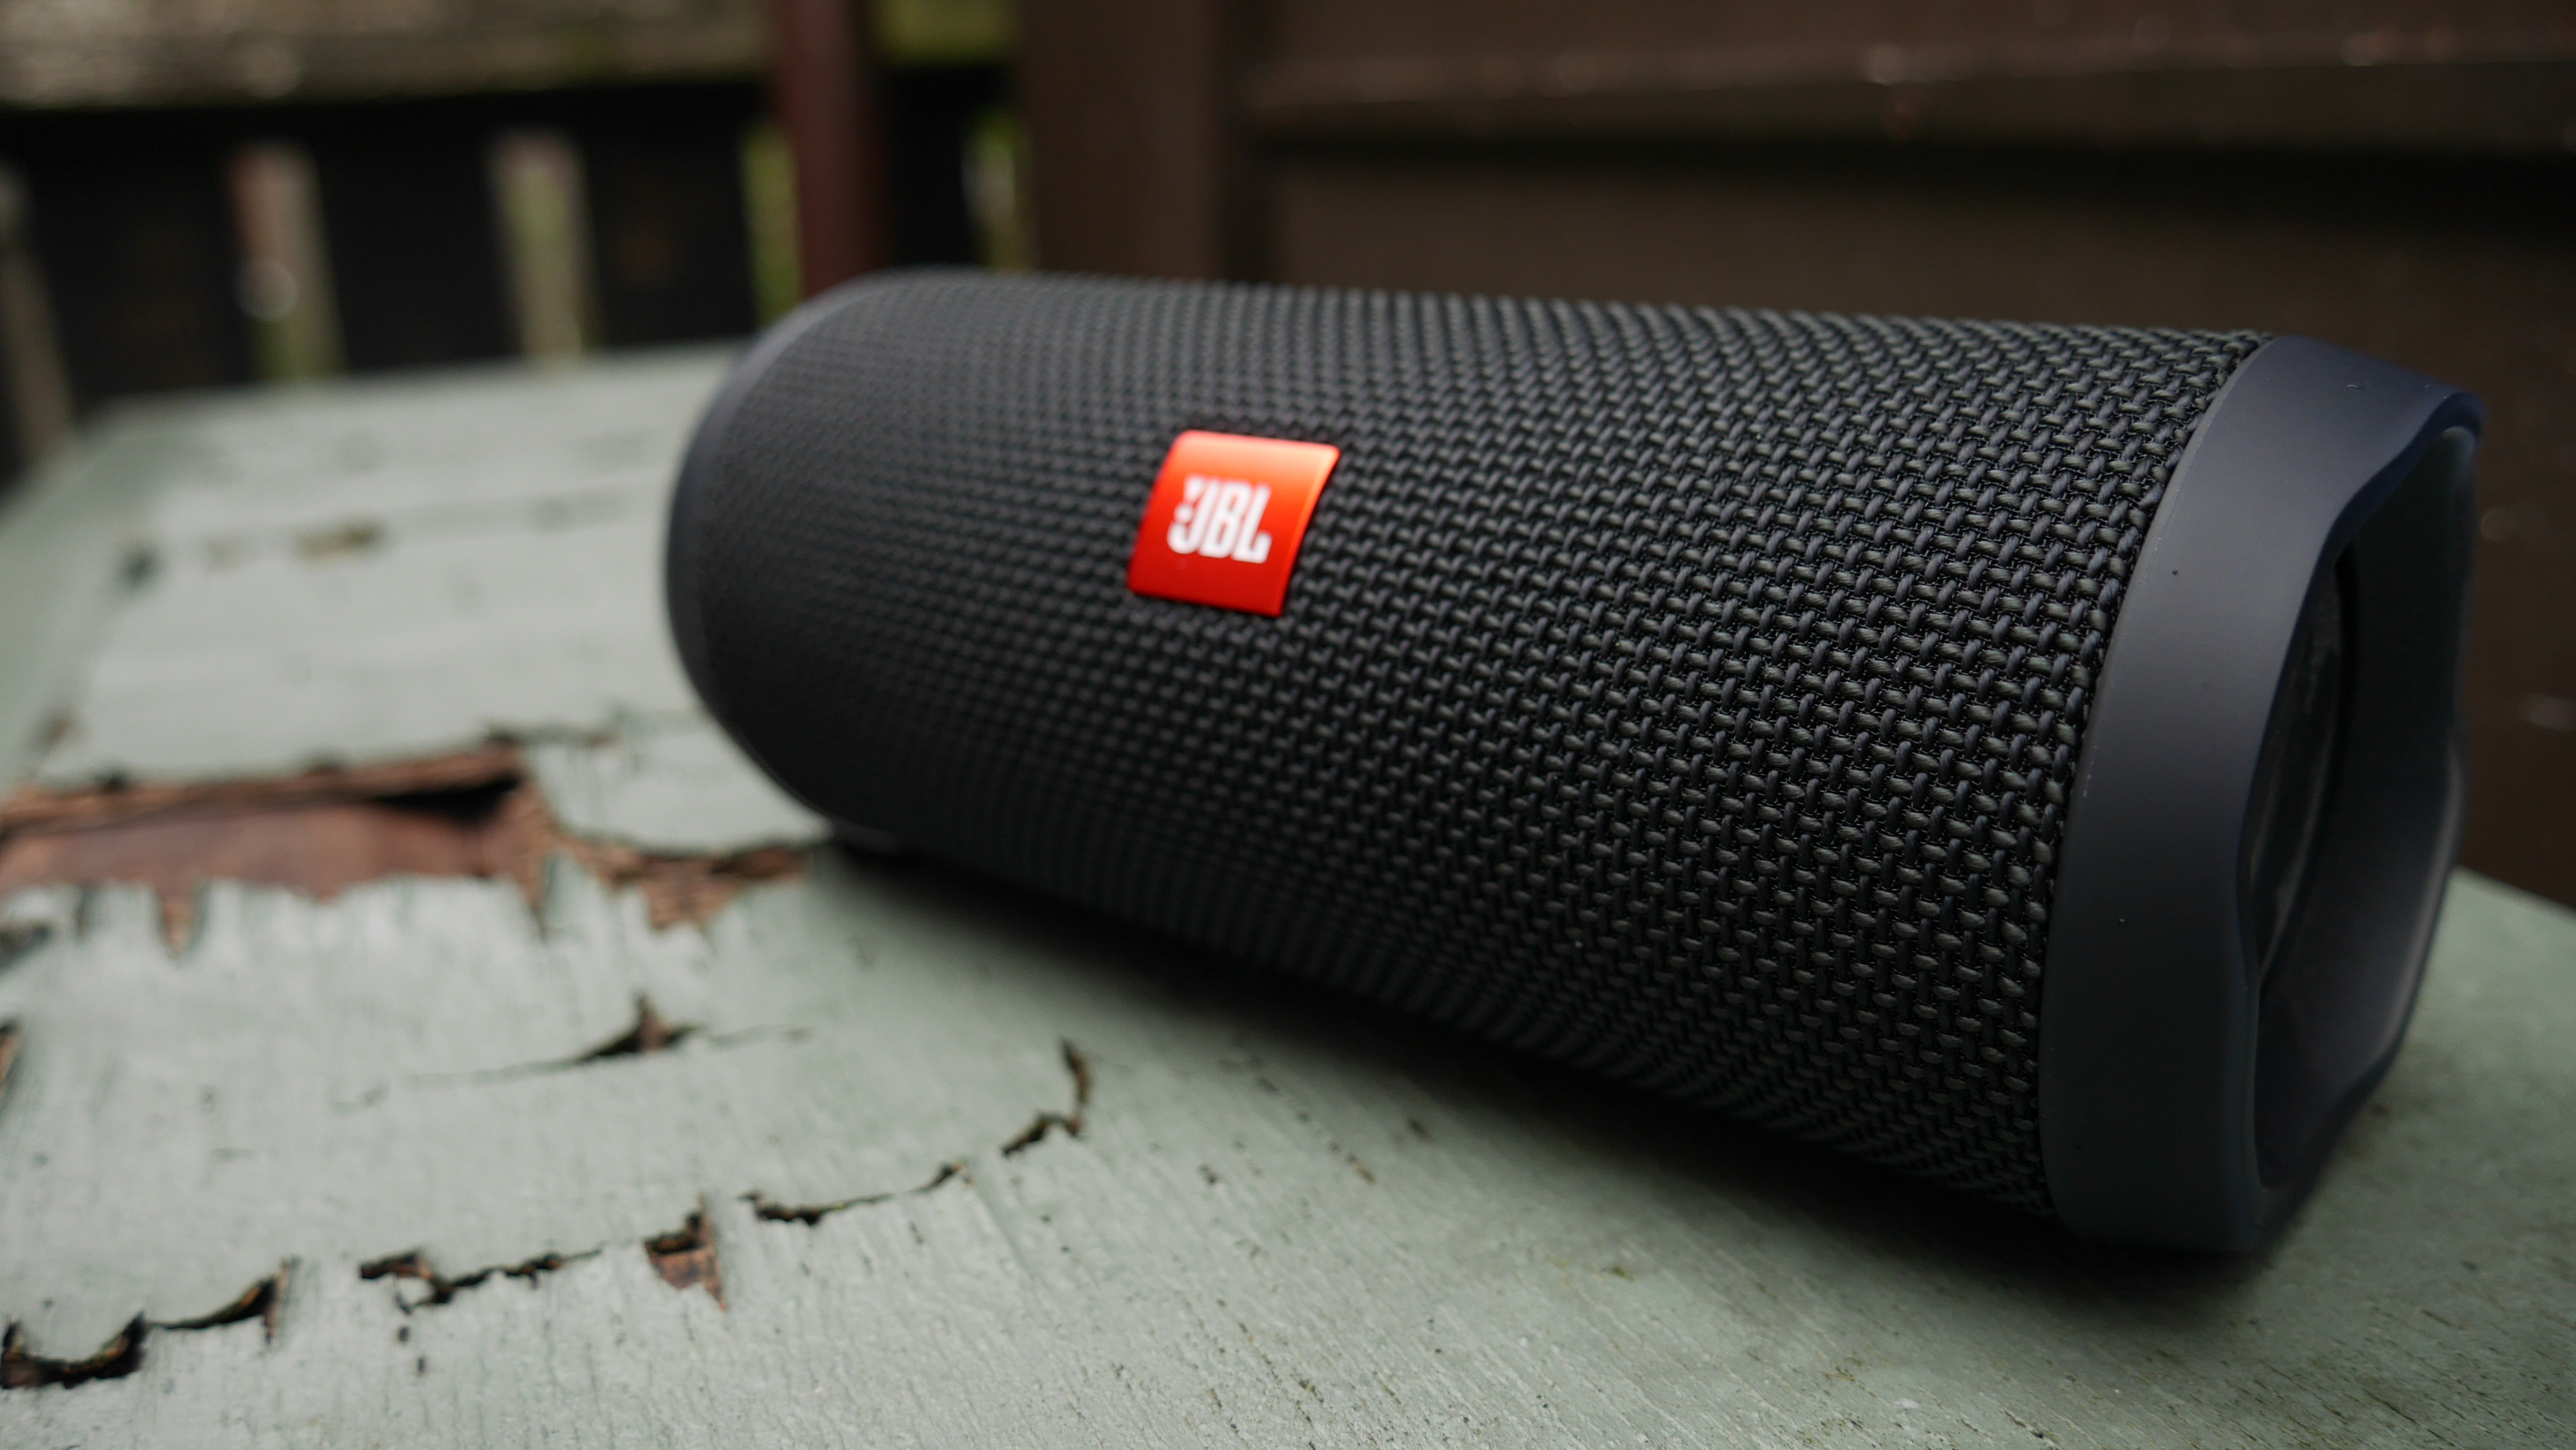 Top Mobiles Bank The best Bluetooth speaker of 2017 the best portable